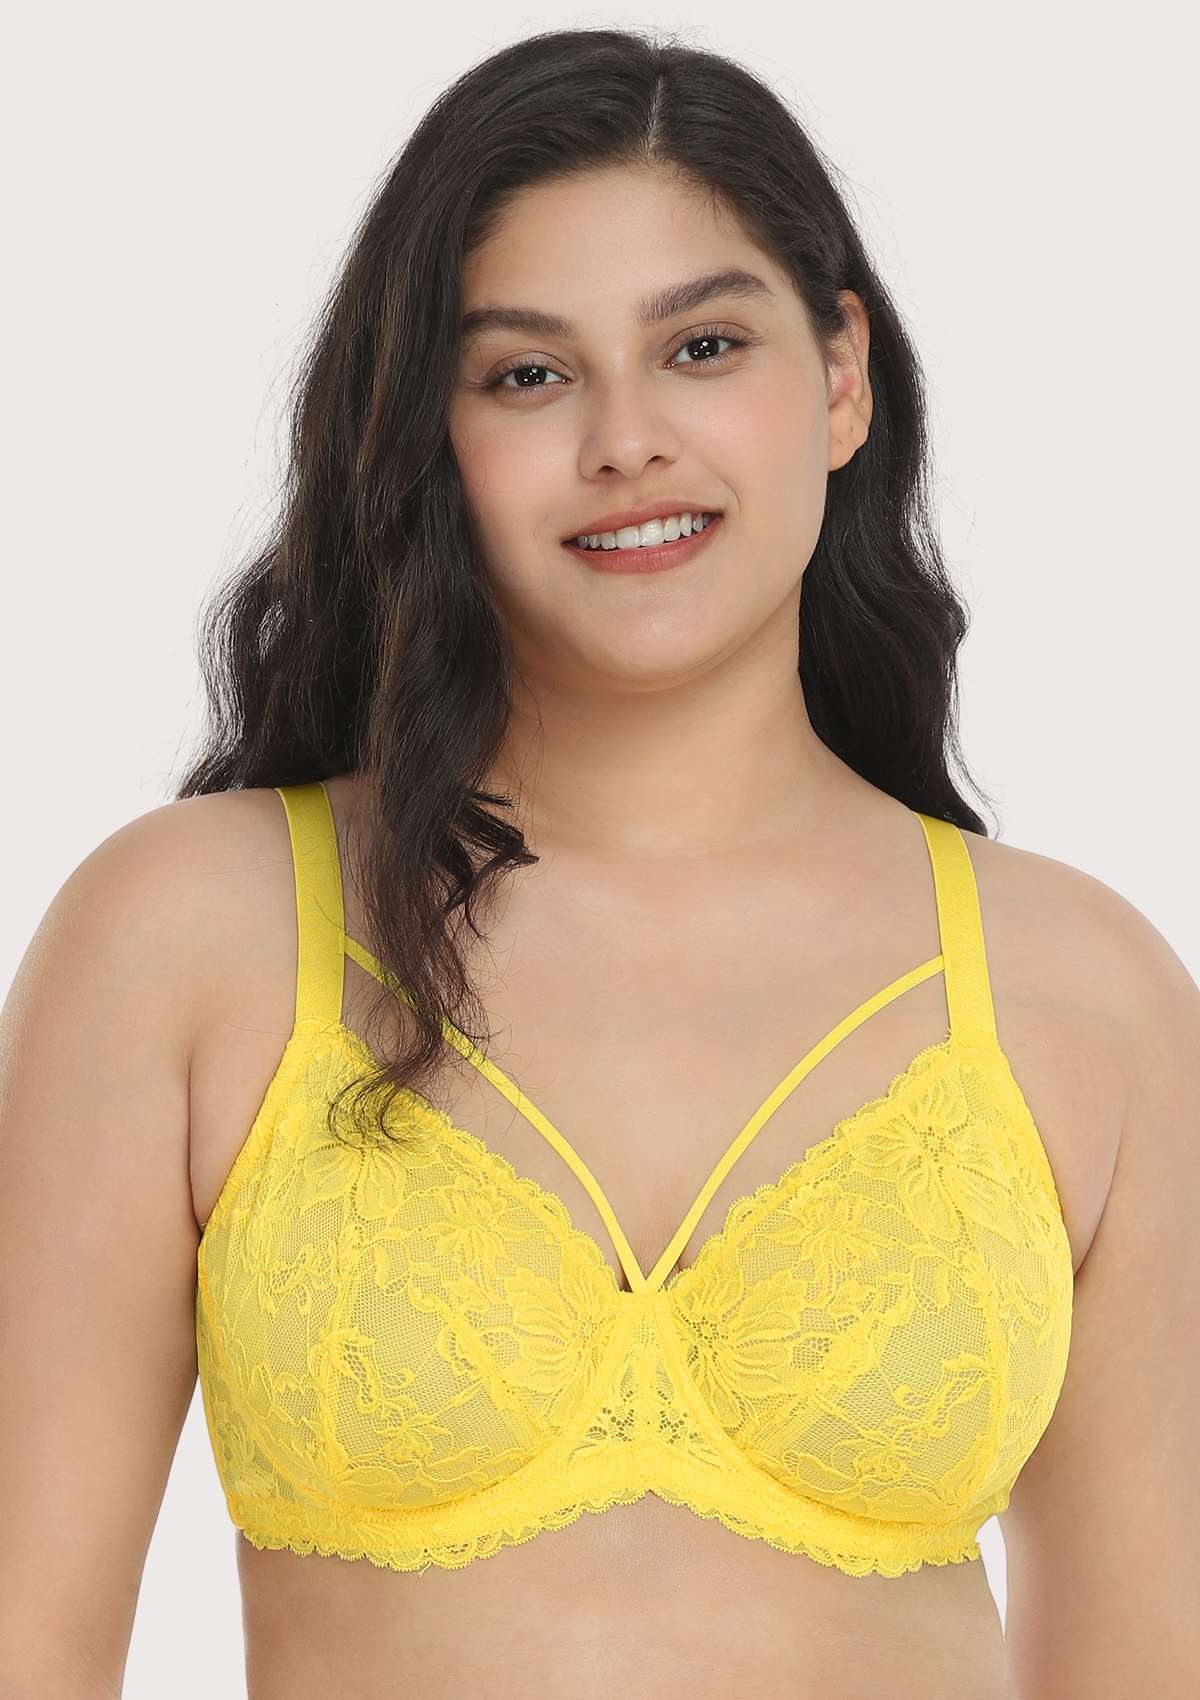 HSIA Unlined Lace Mesh Minimizer Bra For Large Breasts, Full Coverage - Bright Yellow / 36 / D